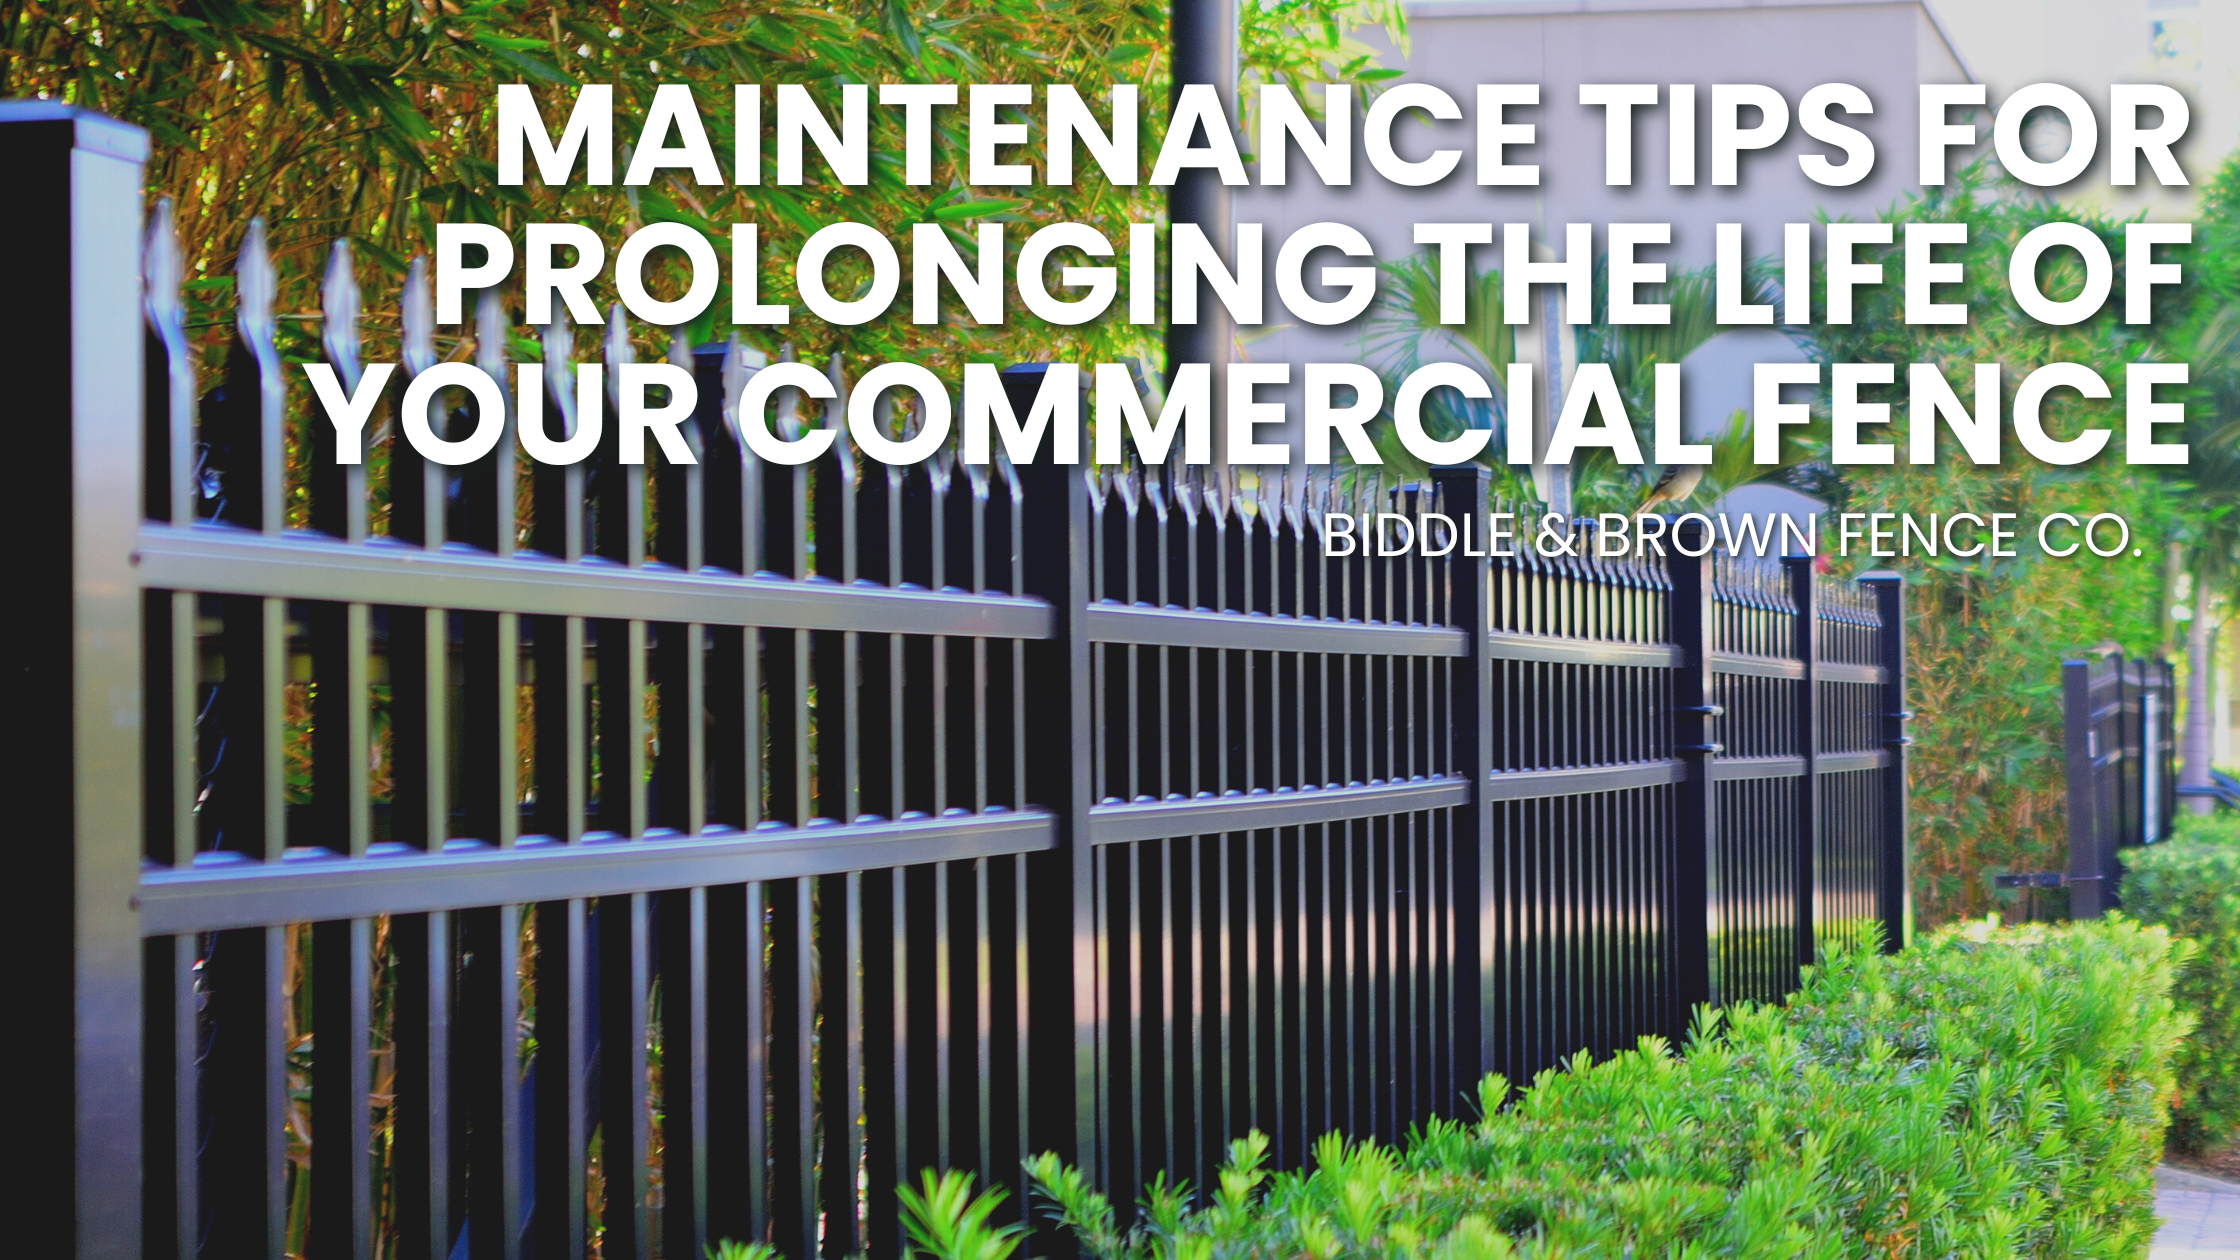 Maintenance Tips for Prolonging the Life of Your Commercial Fence